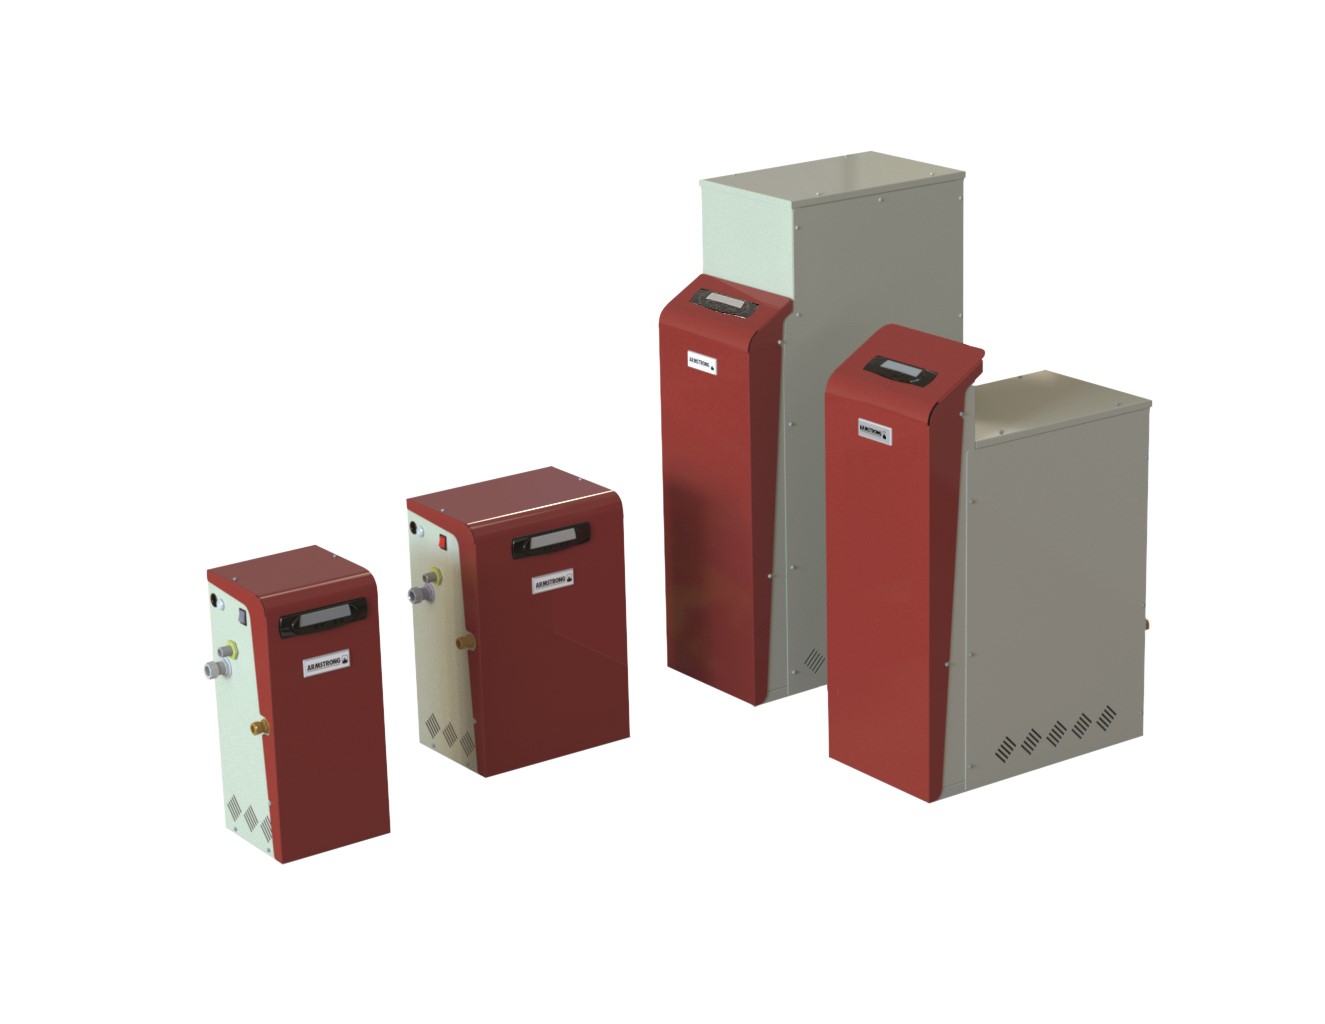 New Range of Pressurisation Units Launched by Armstrong Fluid Technology